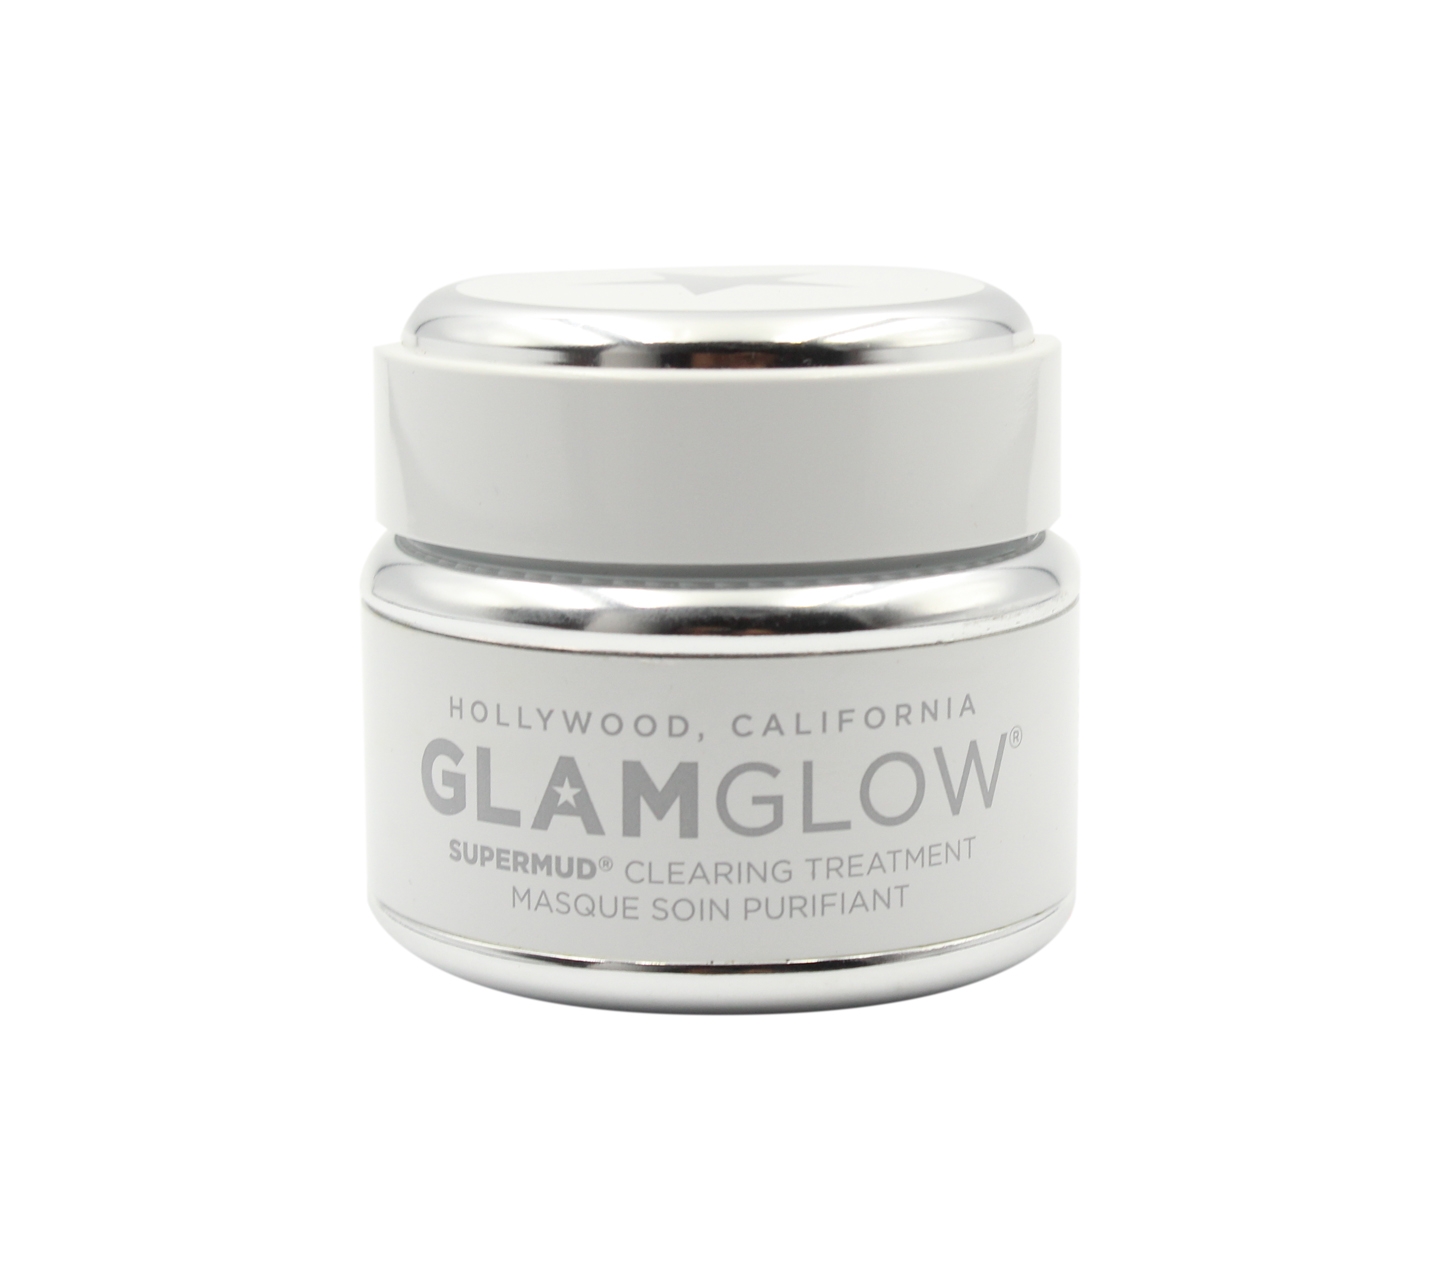 Glamglow Clearing Treatment Masque Soin Purifiant Skin Care